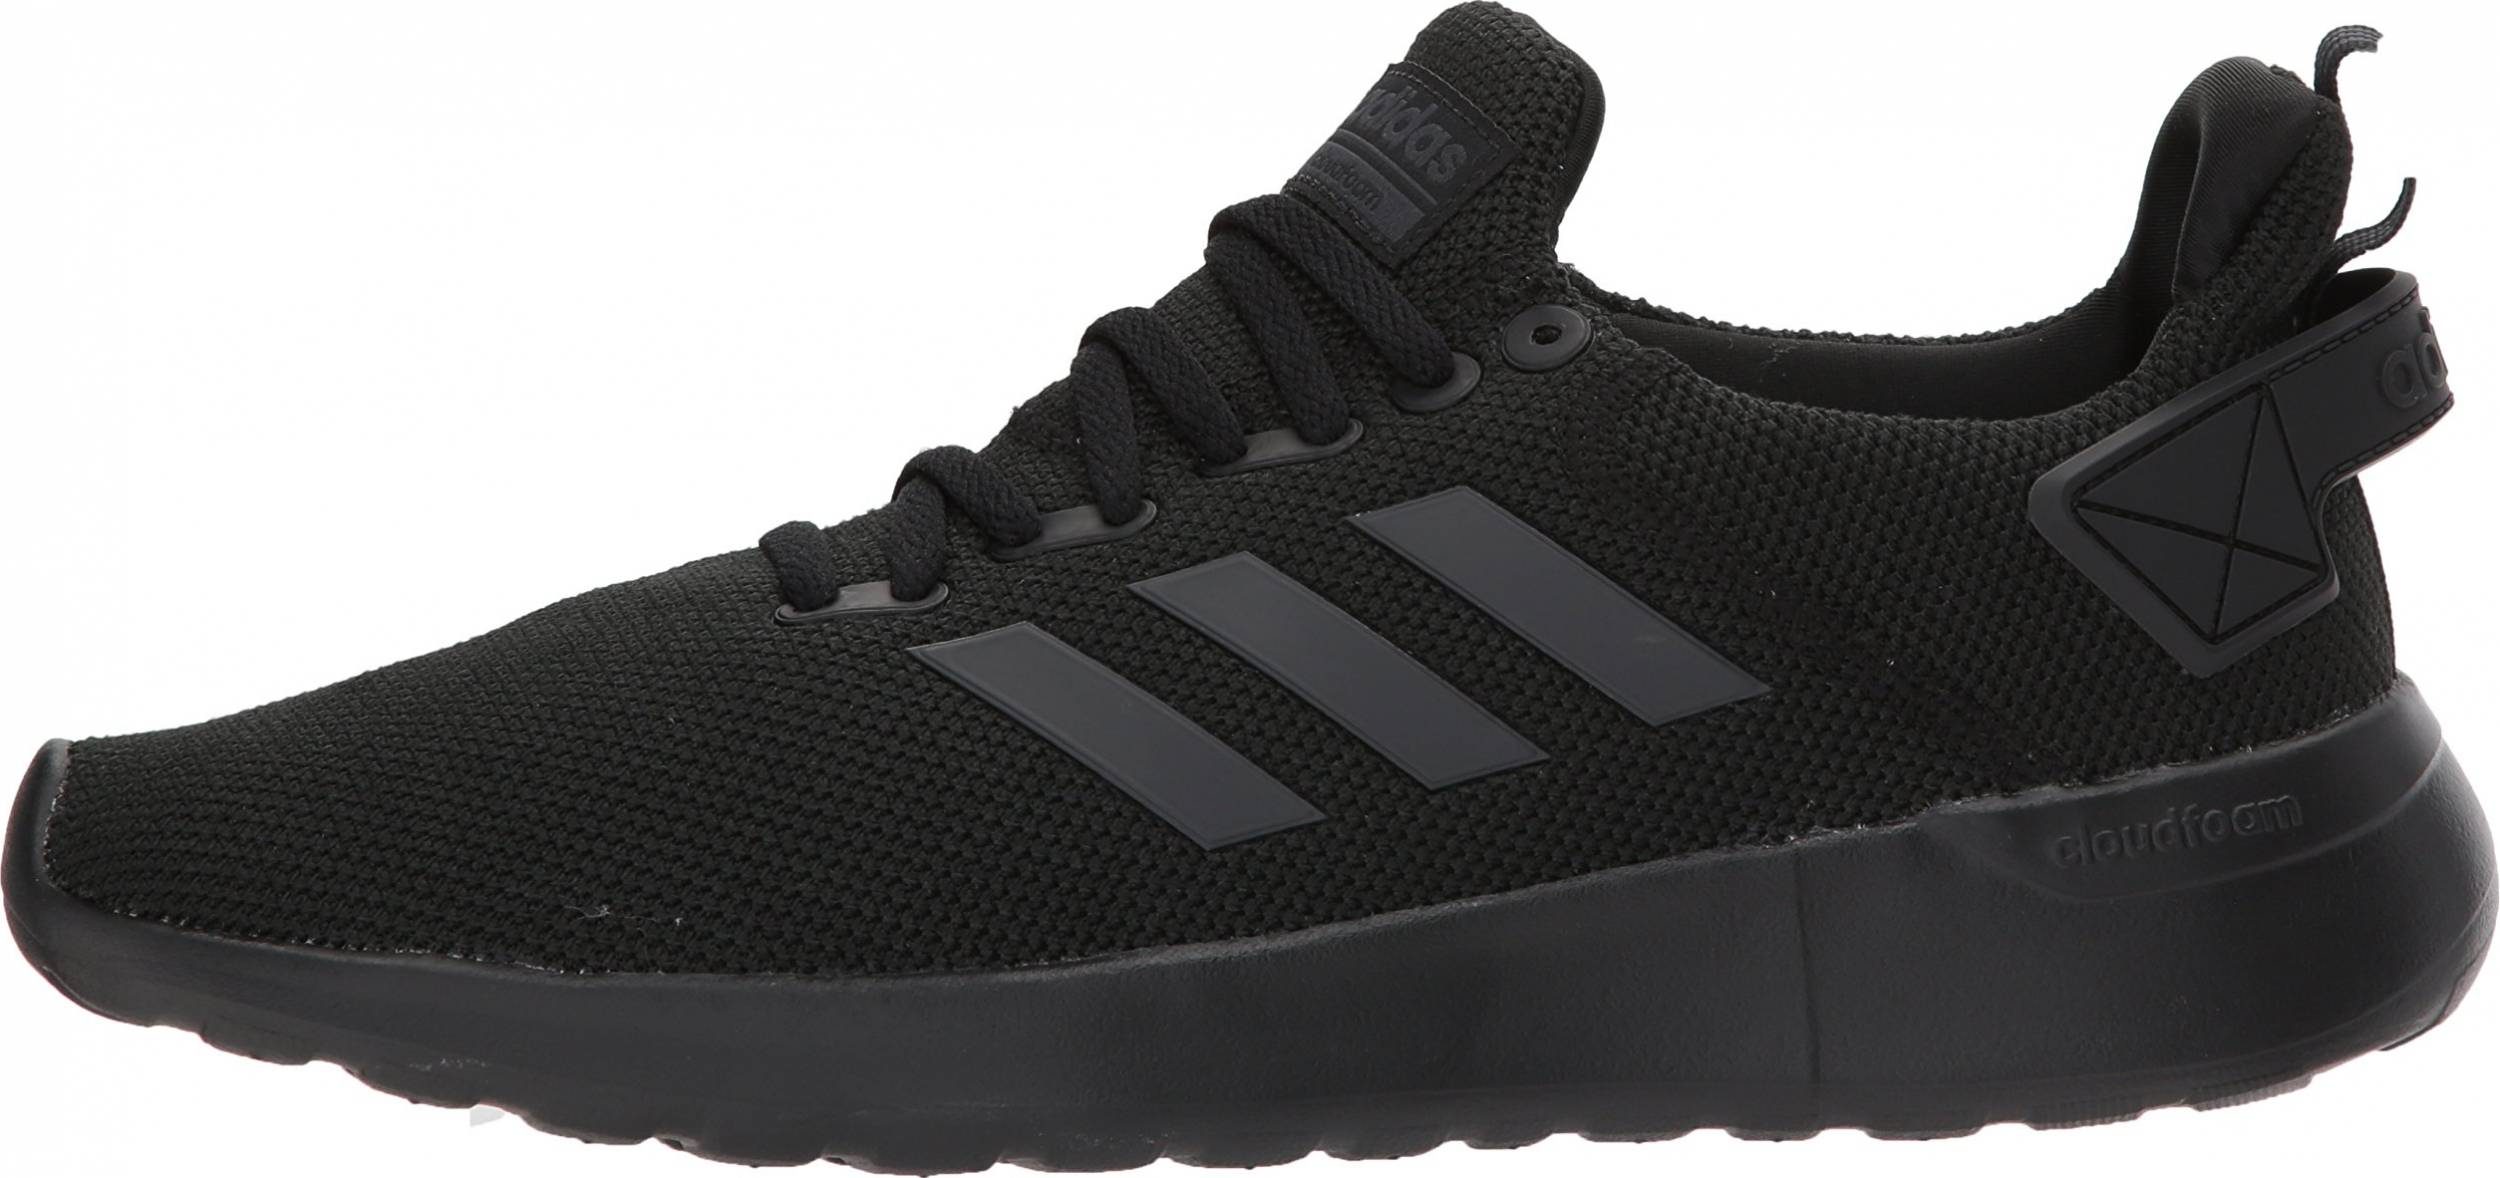 Save 51% on Adidas Cloudfoam Sneakers 